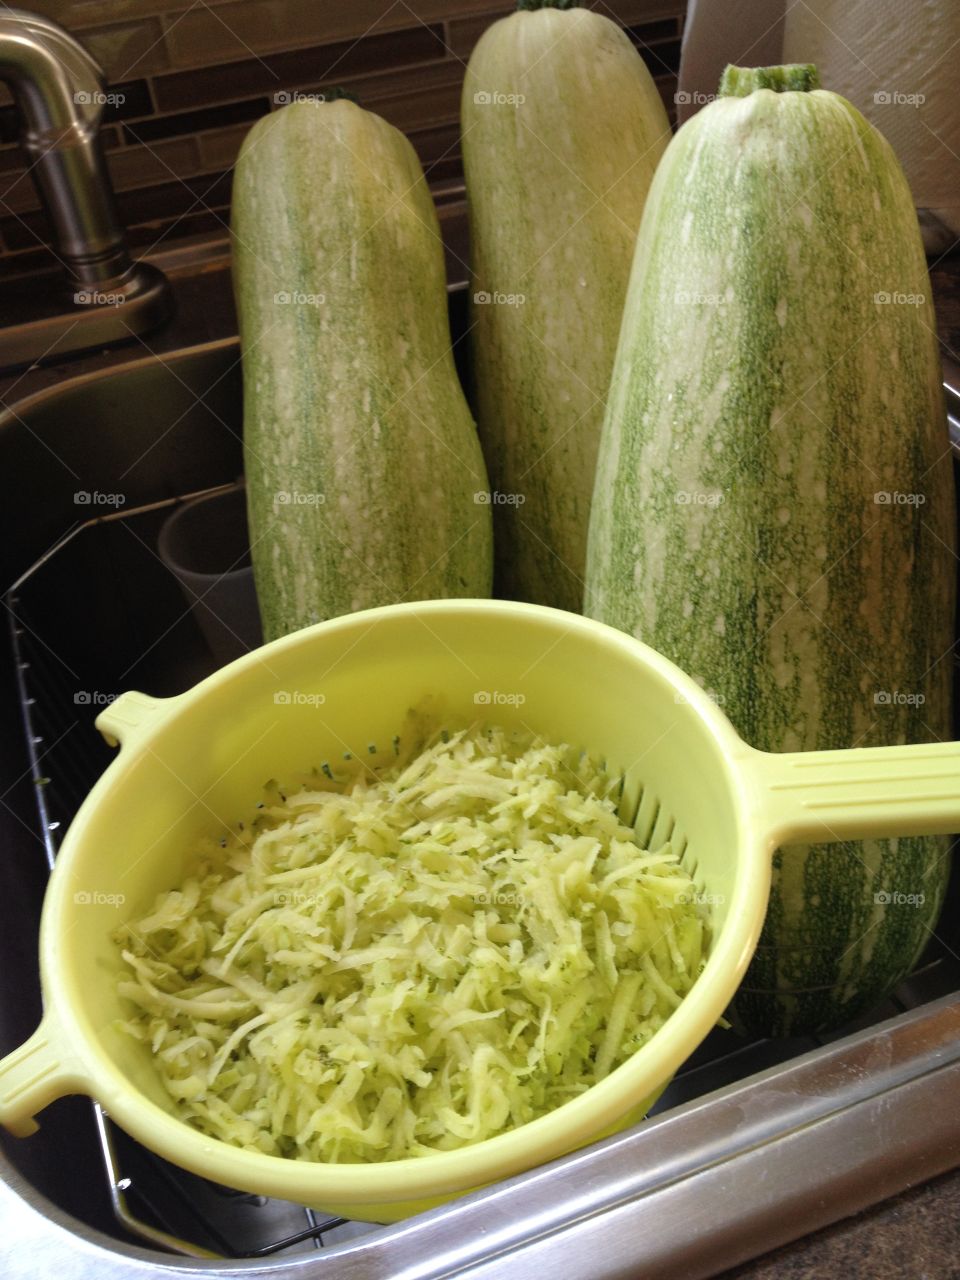 Preparing Zucchini Bread. Huge Zucchinis from the garden, shredded and ready for baking 